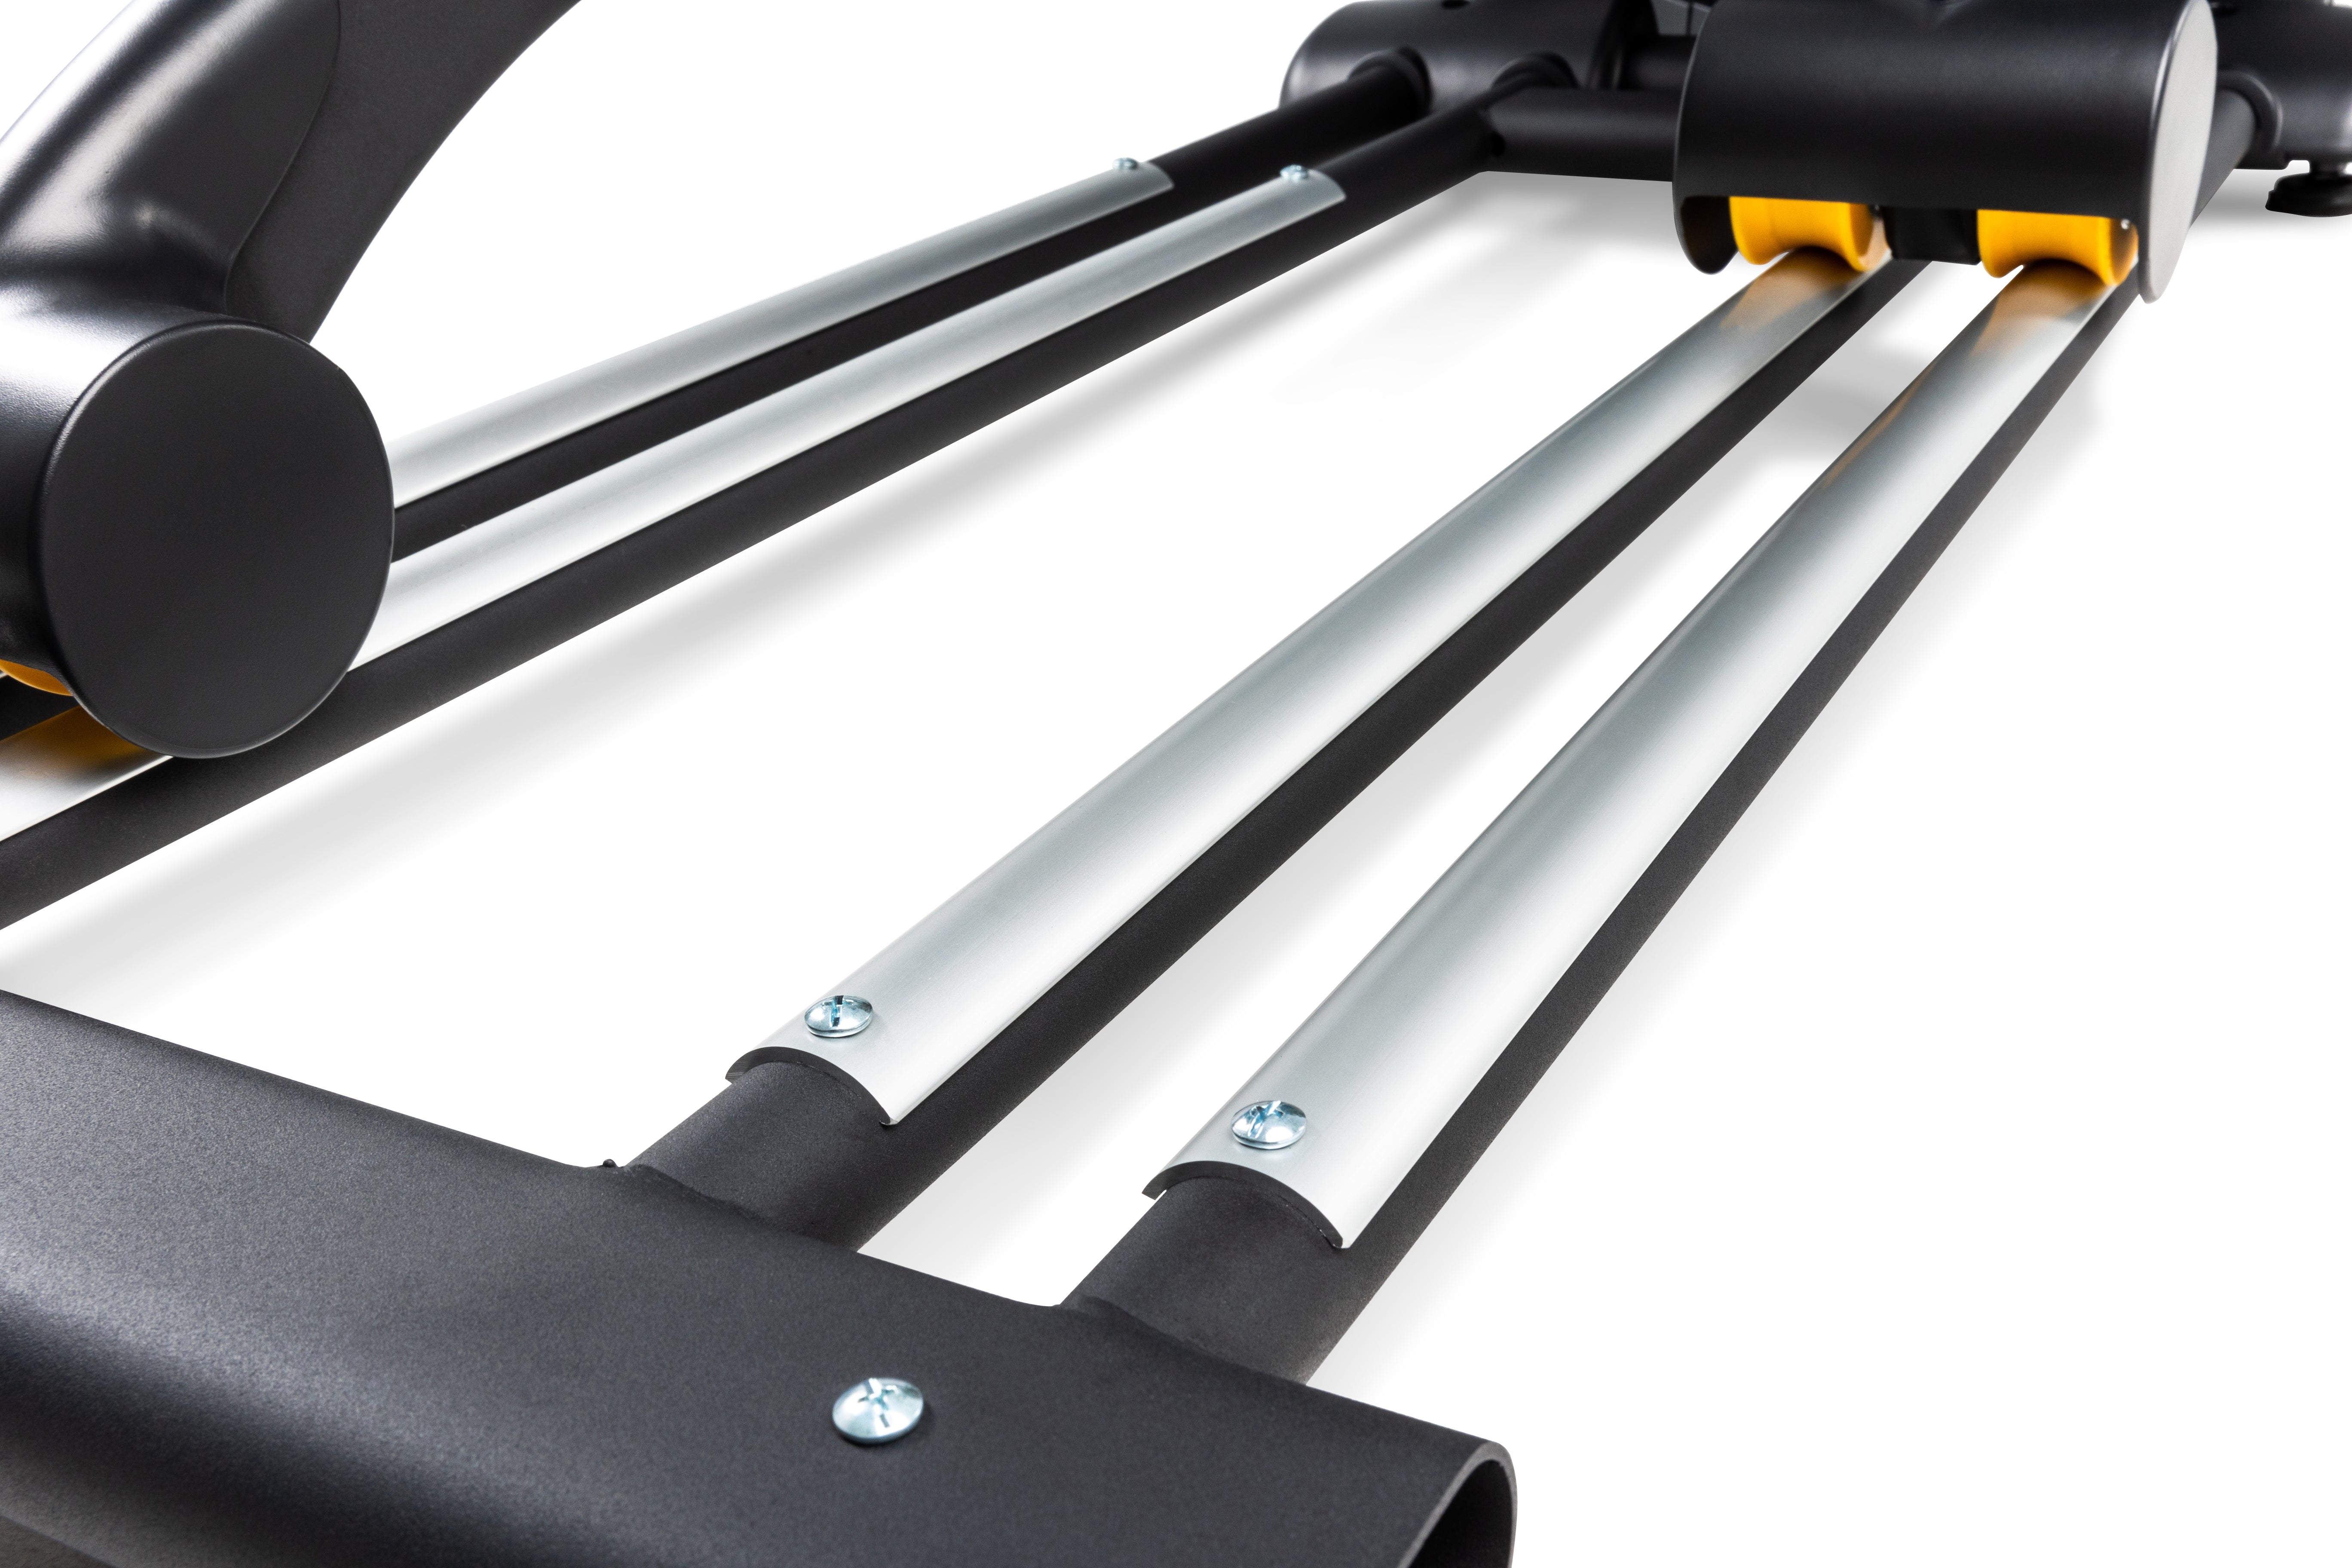 Close-up view of the Sole E95S elliptical machine's foot pedal rails, highlighting the silver tracks, black supports, and yellow rollers. The build quality is emphasized with visible screws and smooth finish.